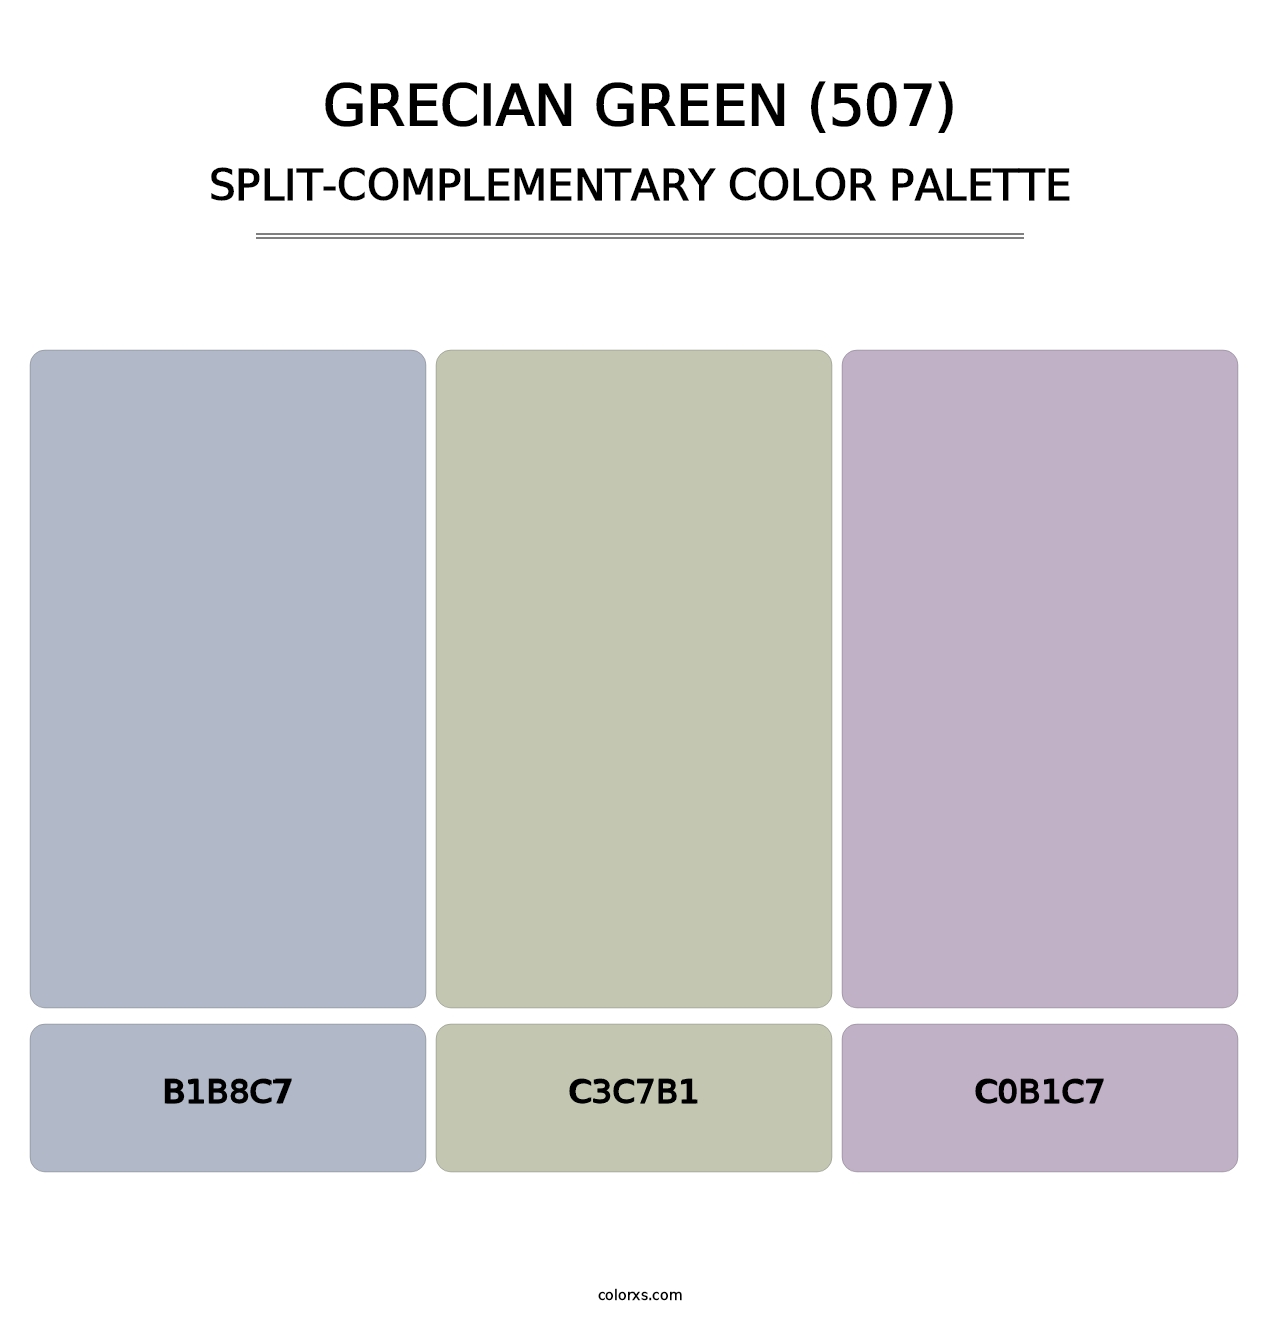 Grecian Green (507) - Split-Complementary Color Palette